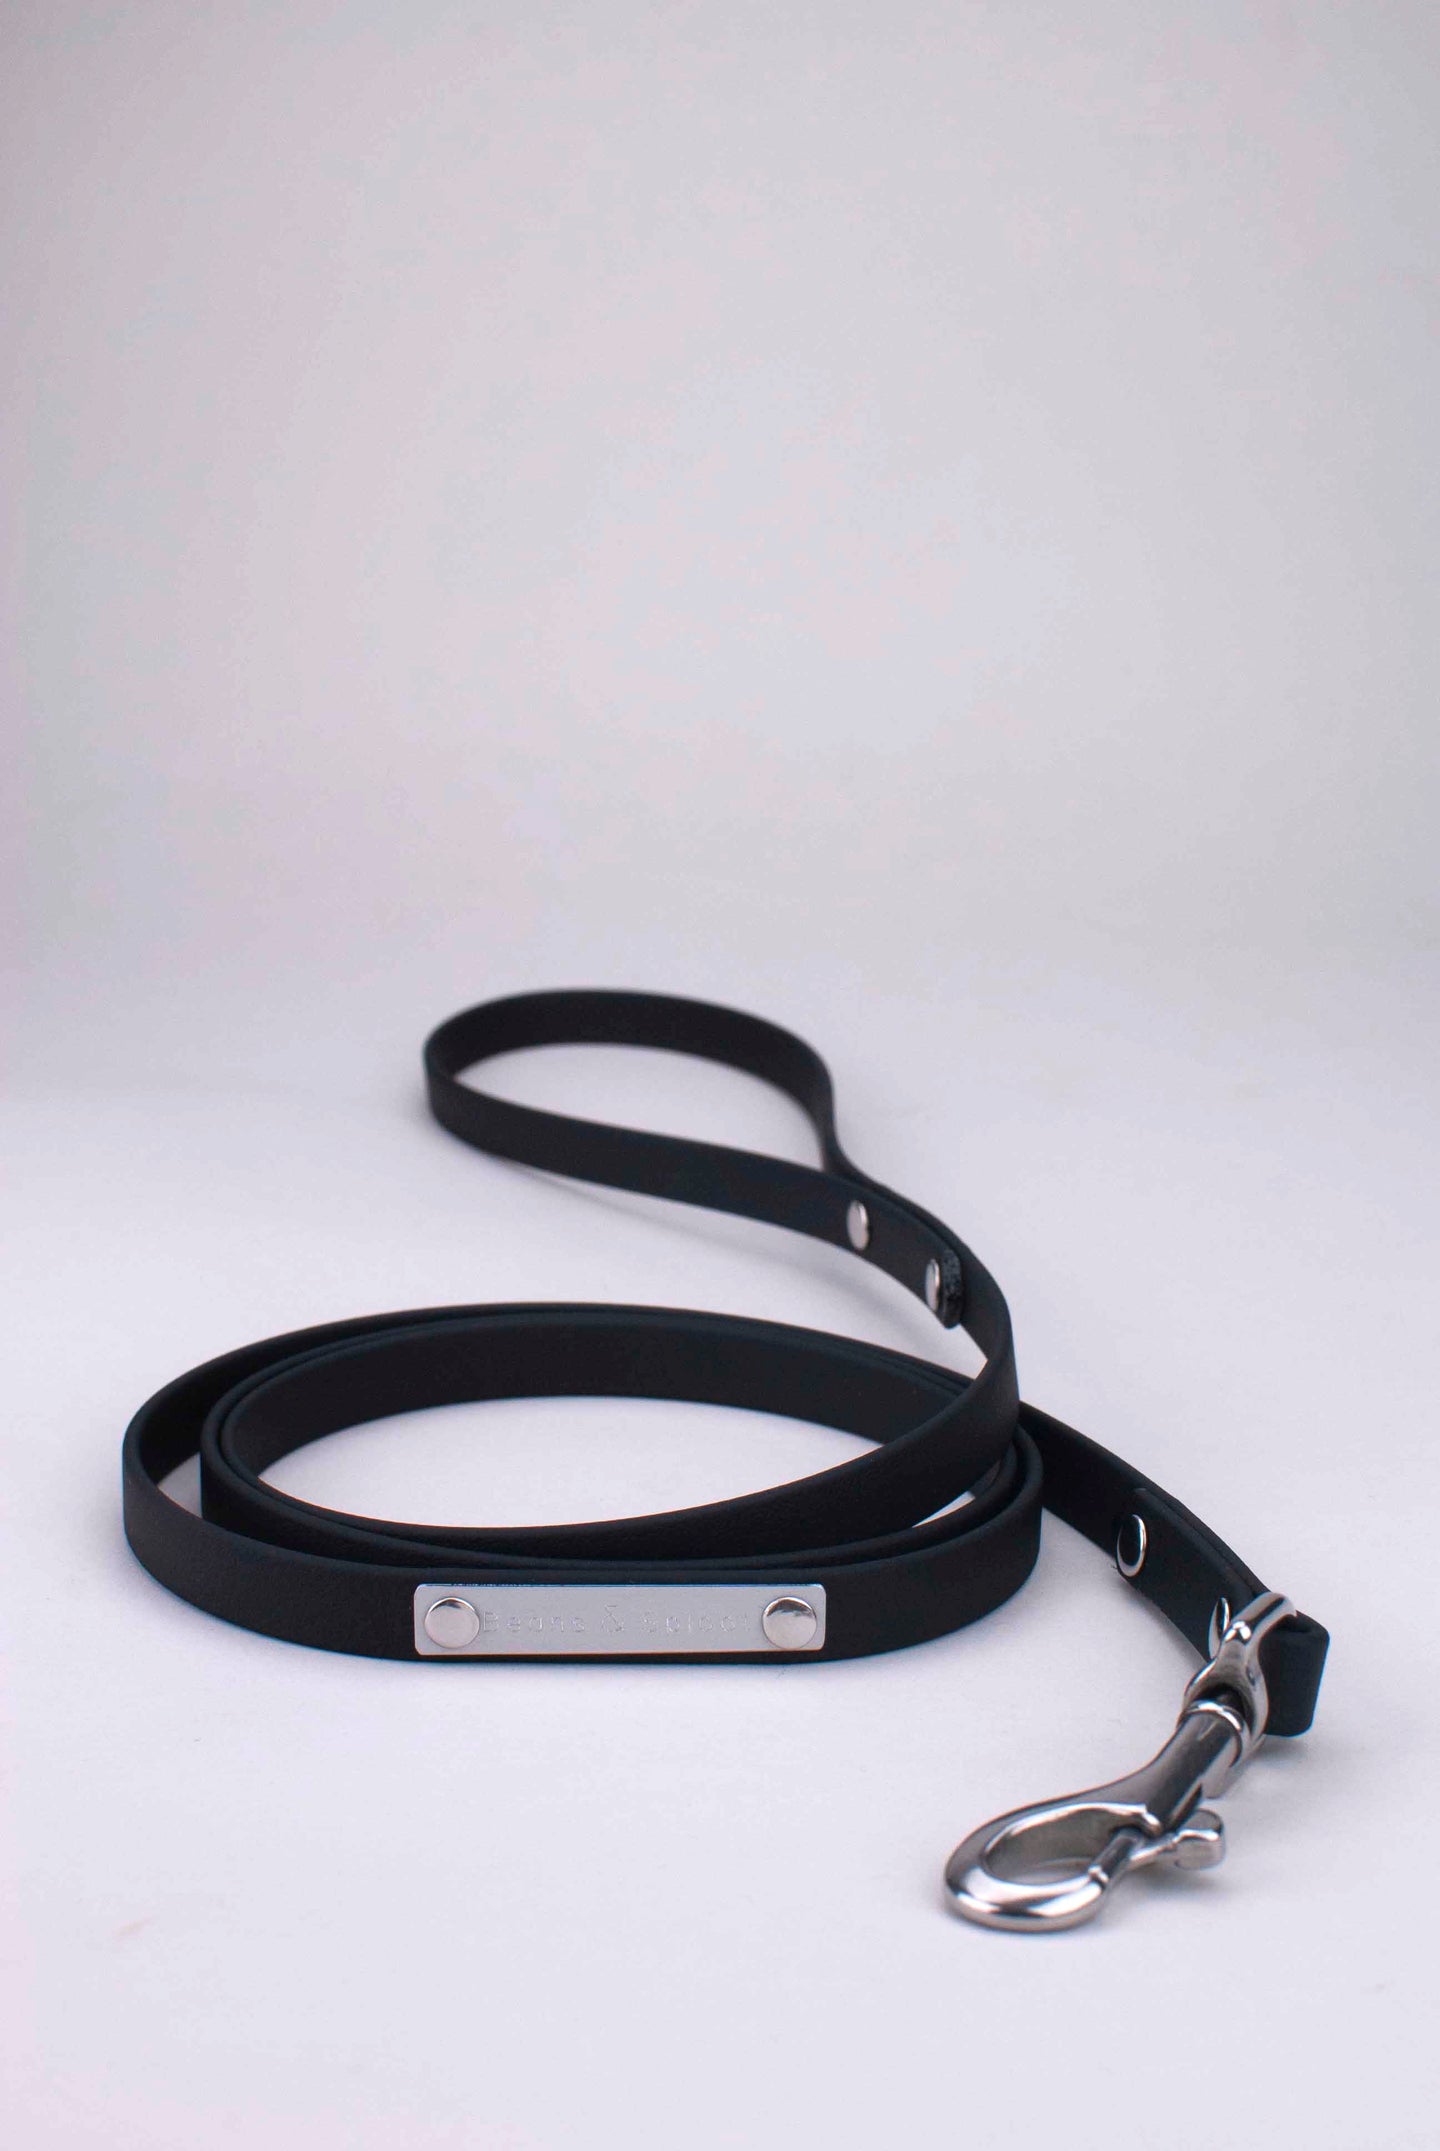 Black leash in biothane with stainless steel rivets, tag and snap hook